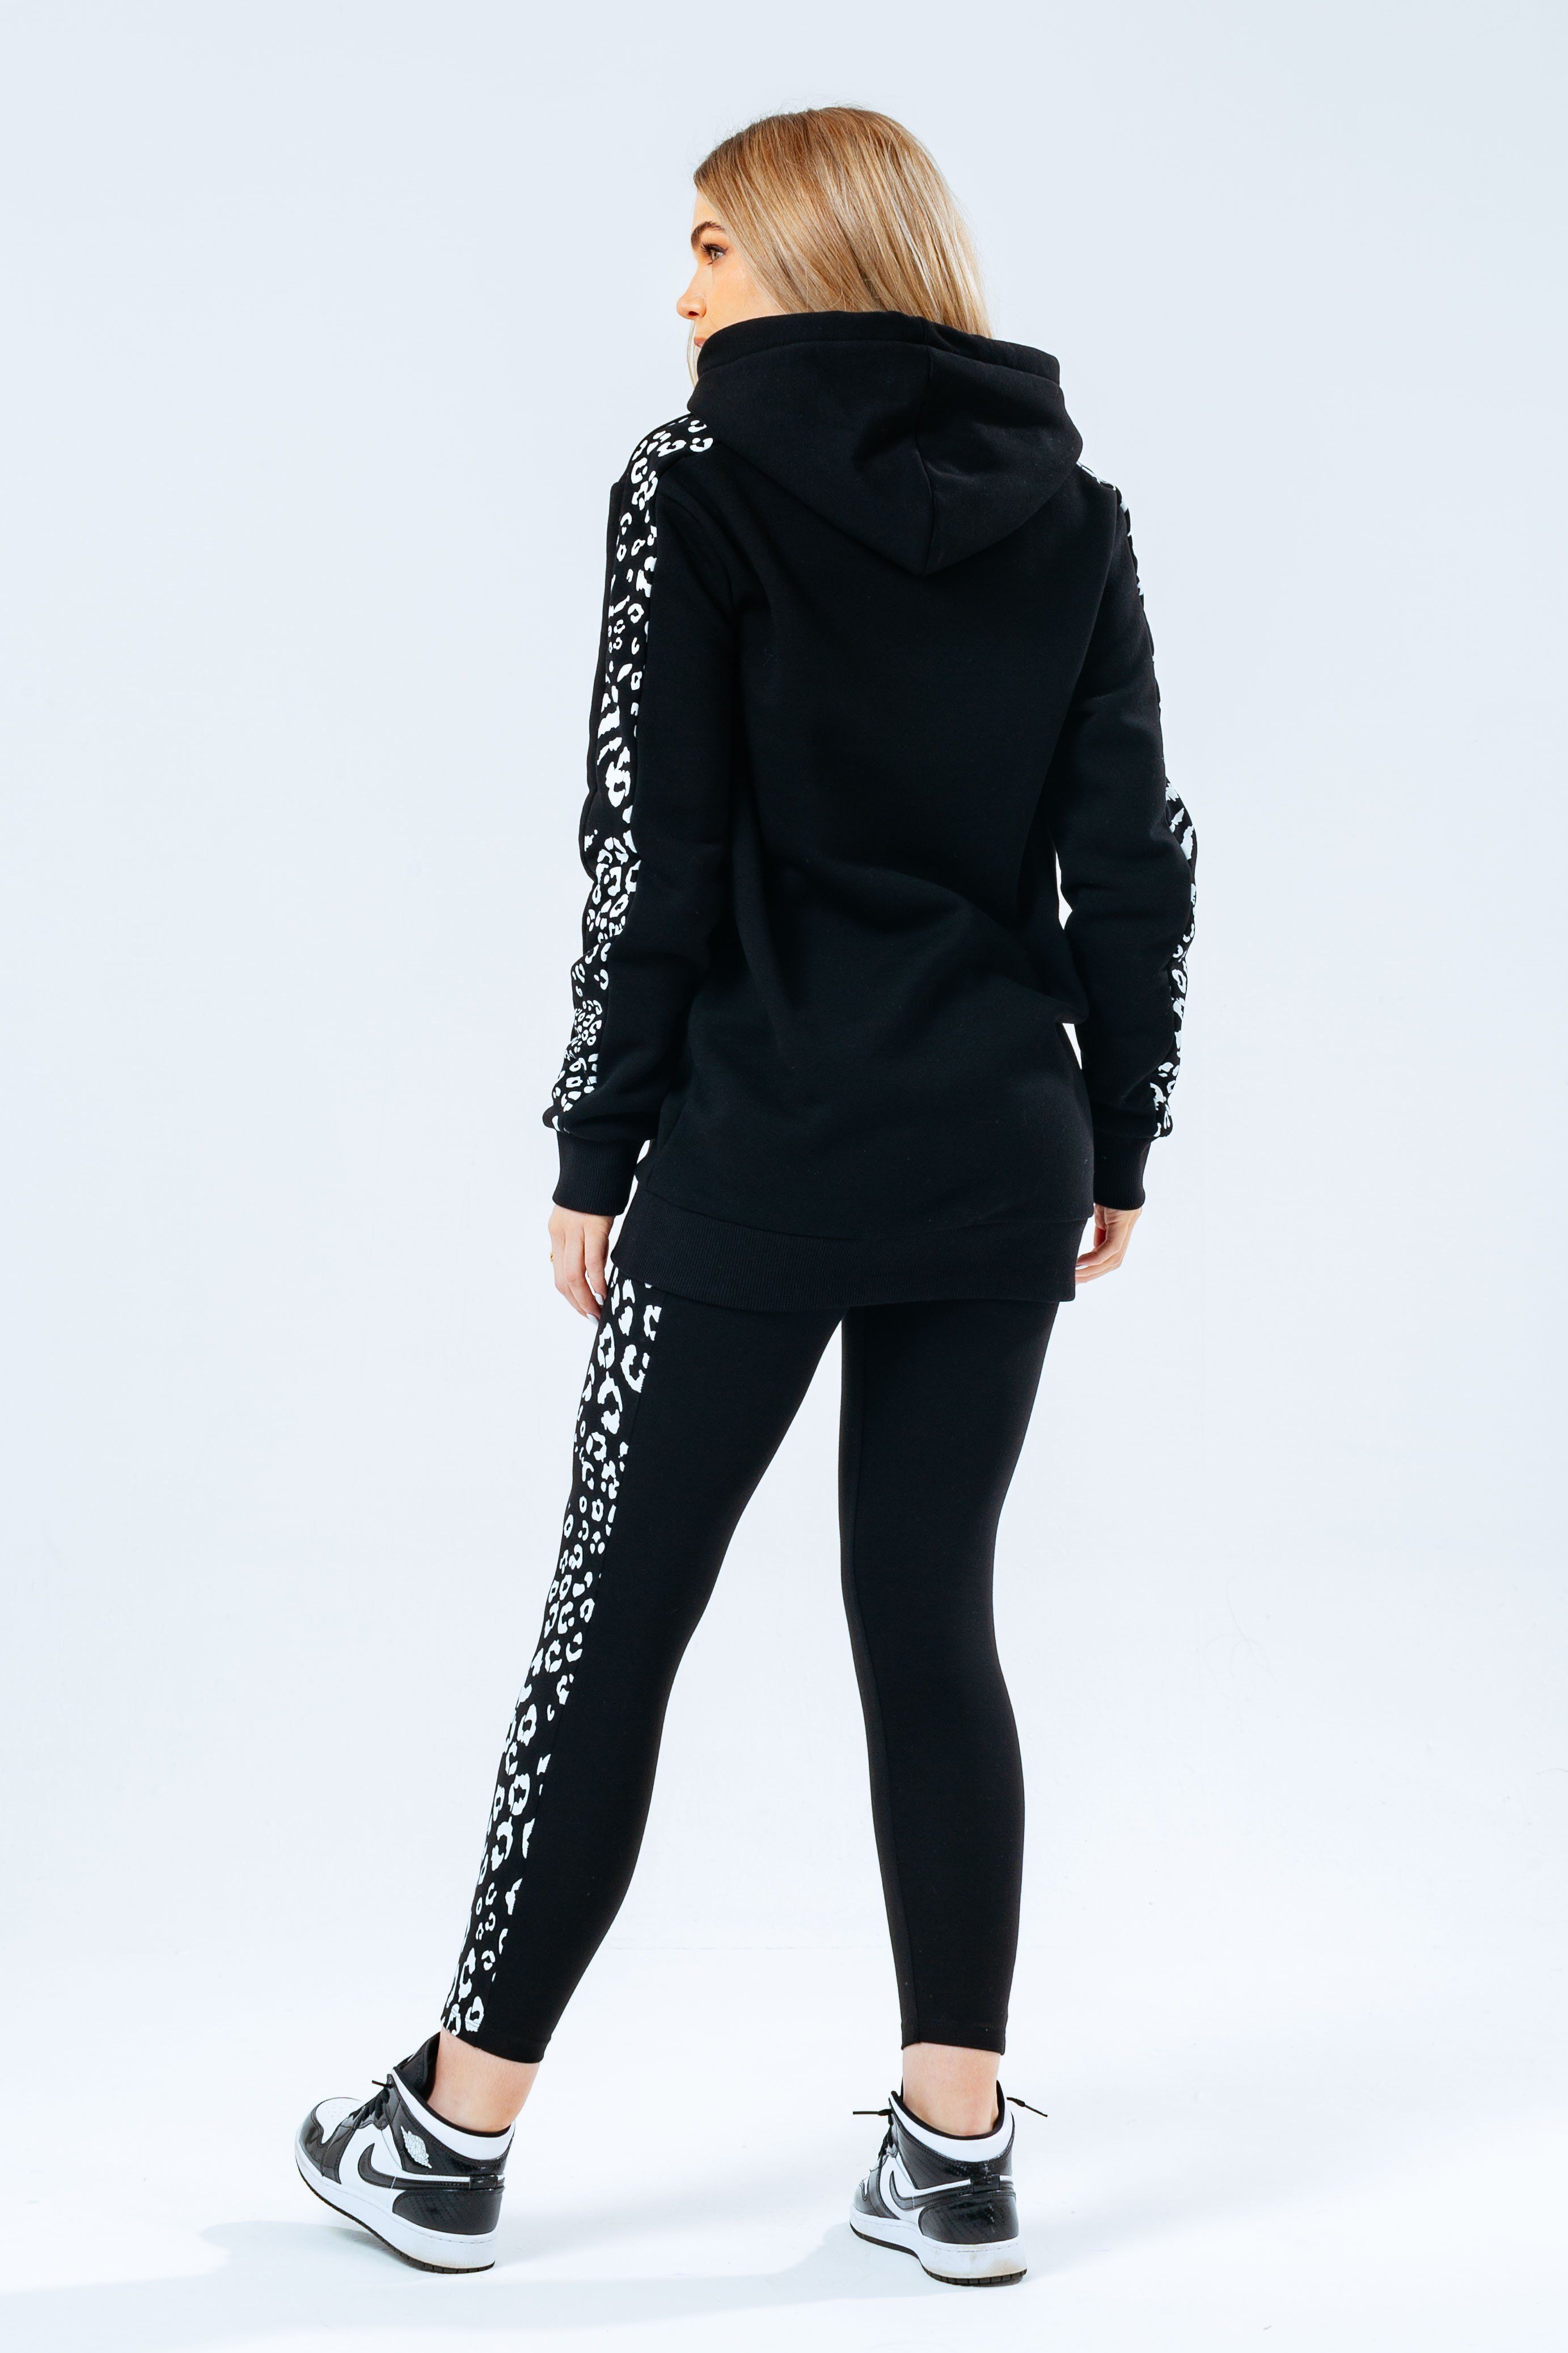 The Hype Black print longline women's hoodie and leggings set is perfect for off-duty casual days. Designed in a black fabric base with the ultimate soft-touch sweat fabric for supreme comfort. The womens hoodie highlights a fixed hood, fitted hem and cuffs, printed animal panels on the arms, finished with the iconic HYPE. signature logo in white embroidered across the front. The leggings boast an elasticated waistband and printed animal side panels across the leg. Wear stand alone or as a set with a pair of box fresh kicks to complete the look. Machine wash at 30 degrees.